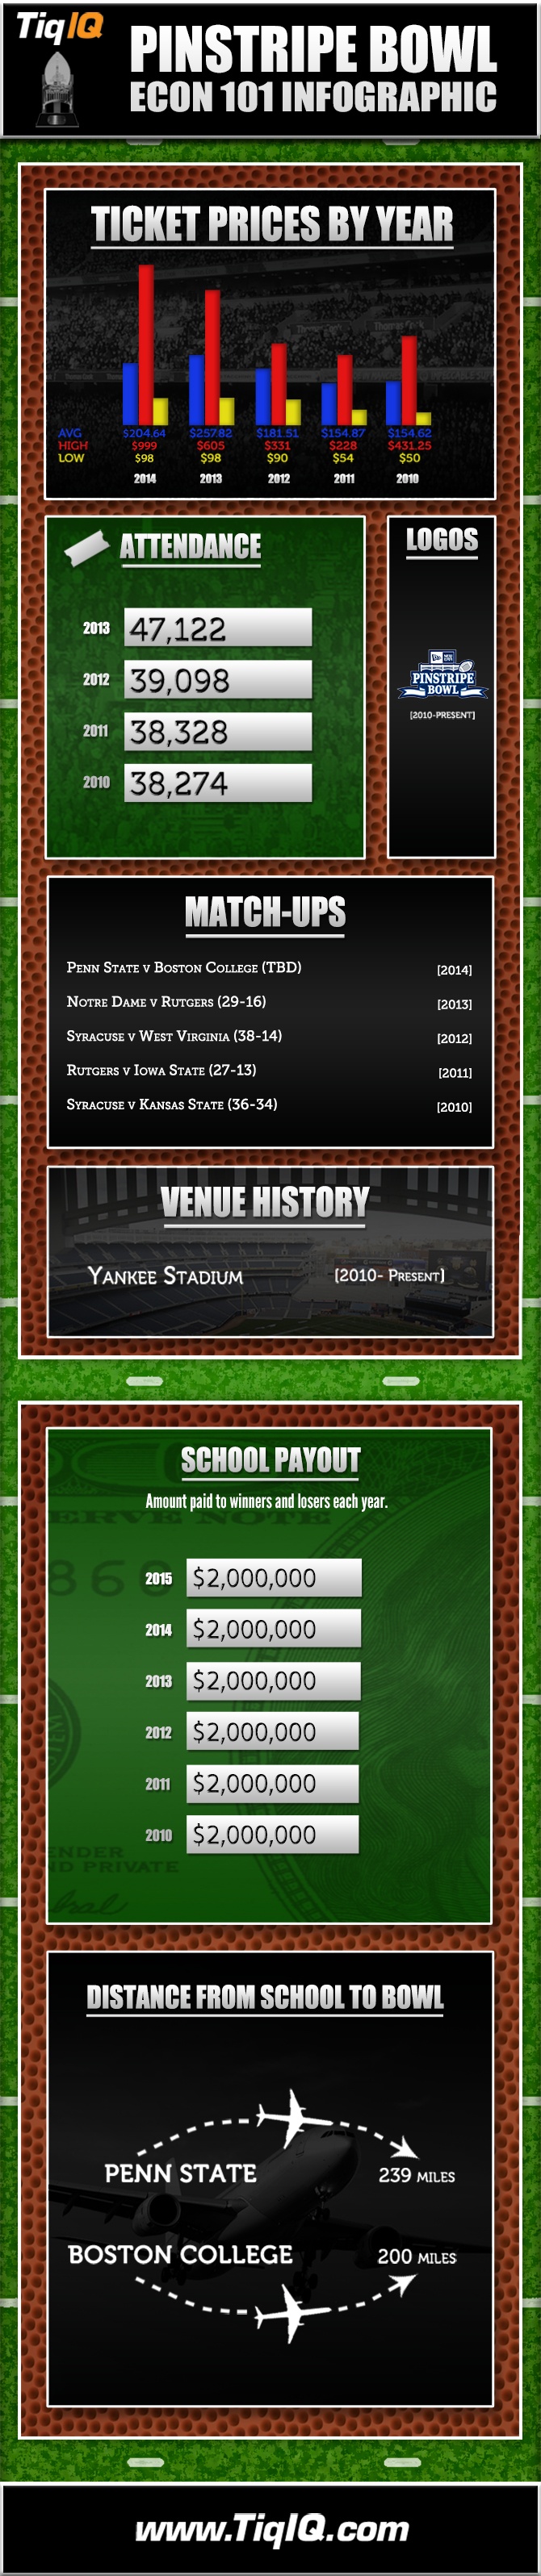 Pinstripe Bowl Tickets Are 2nd Most Expensive In 5 Years (and Infographic)